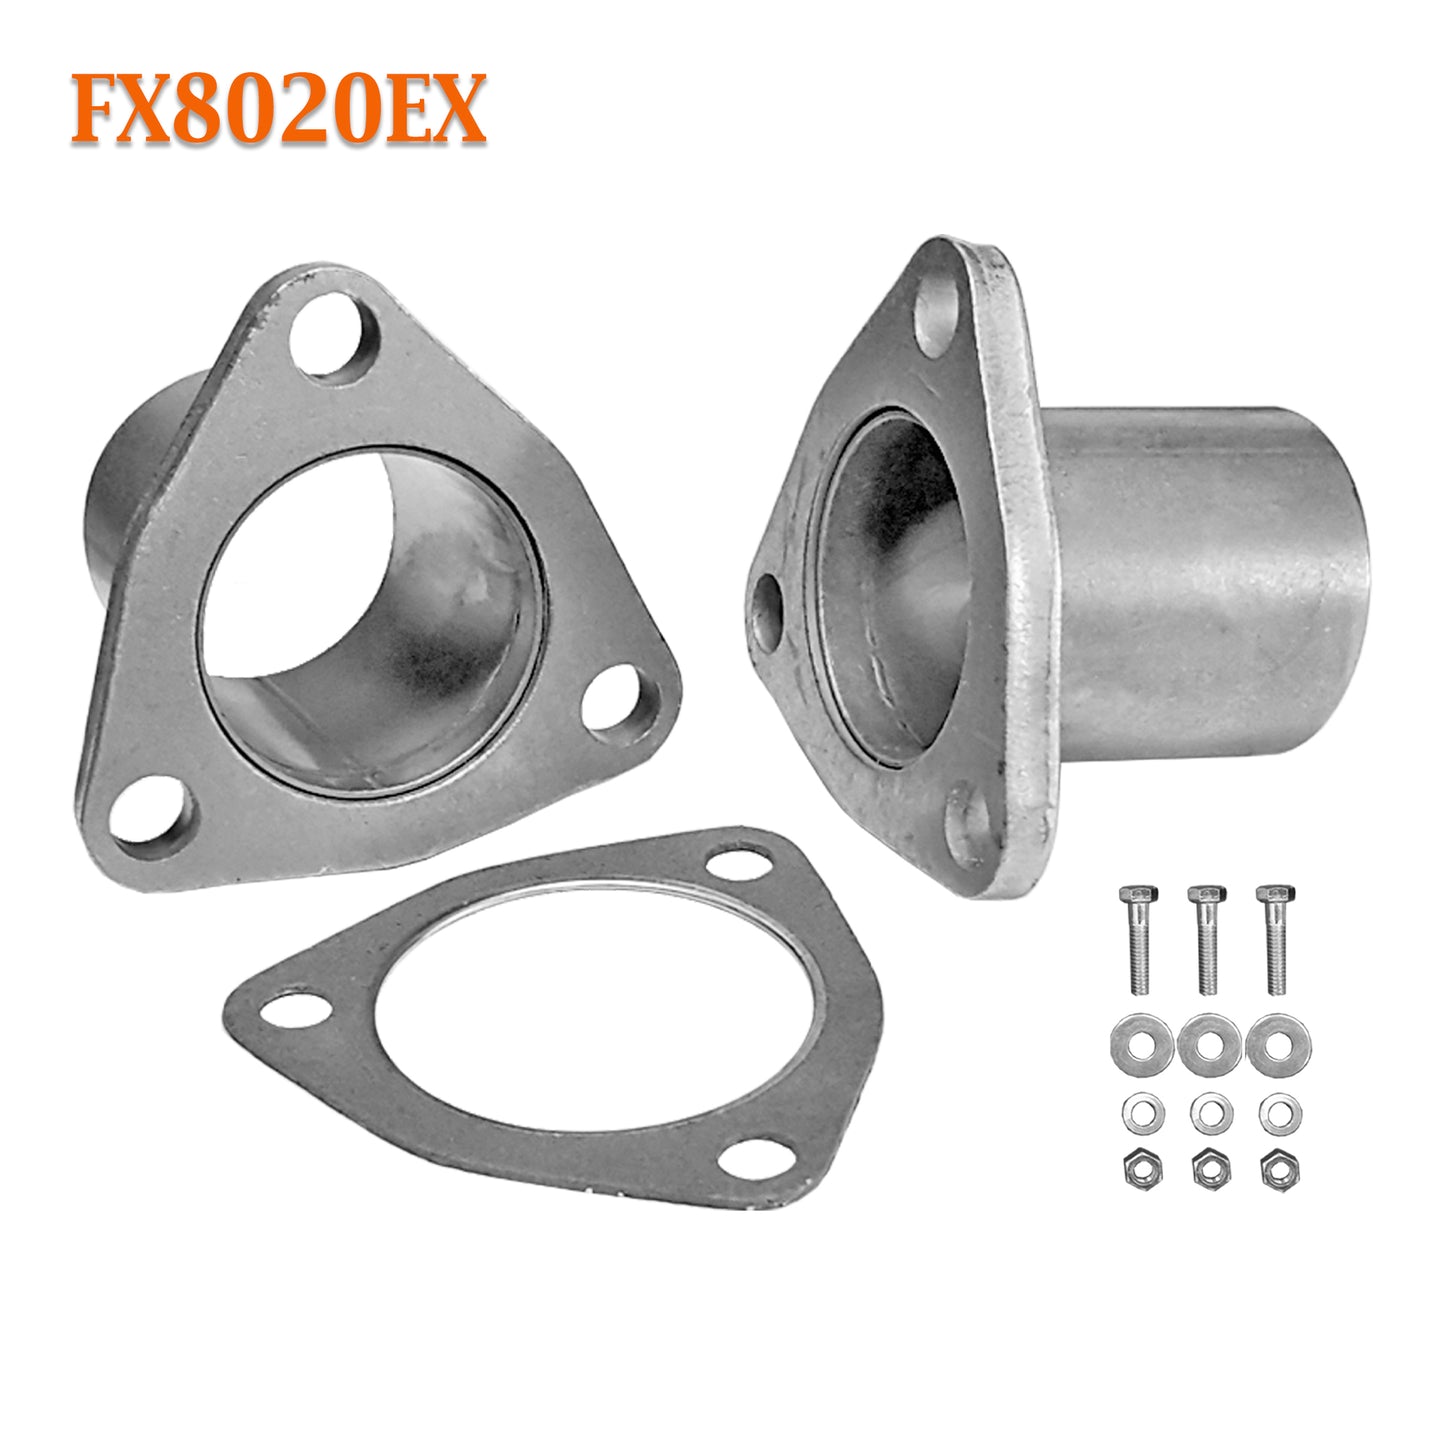 FX8020EX 2 1/2" ID Universal QuickFix Exhaust Triangle Flange Repair Pipe Kit